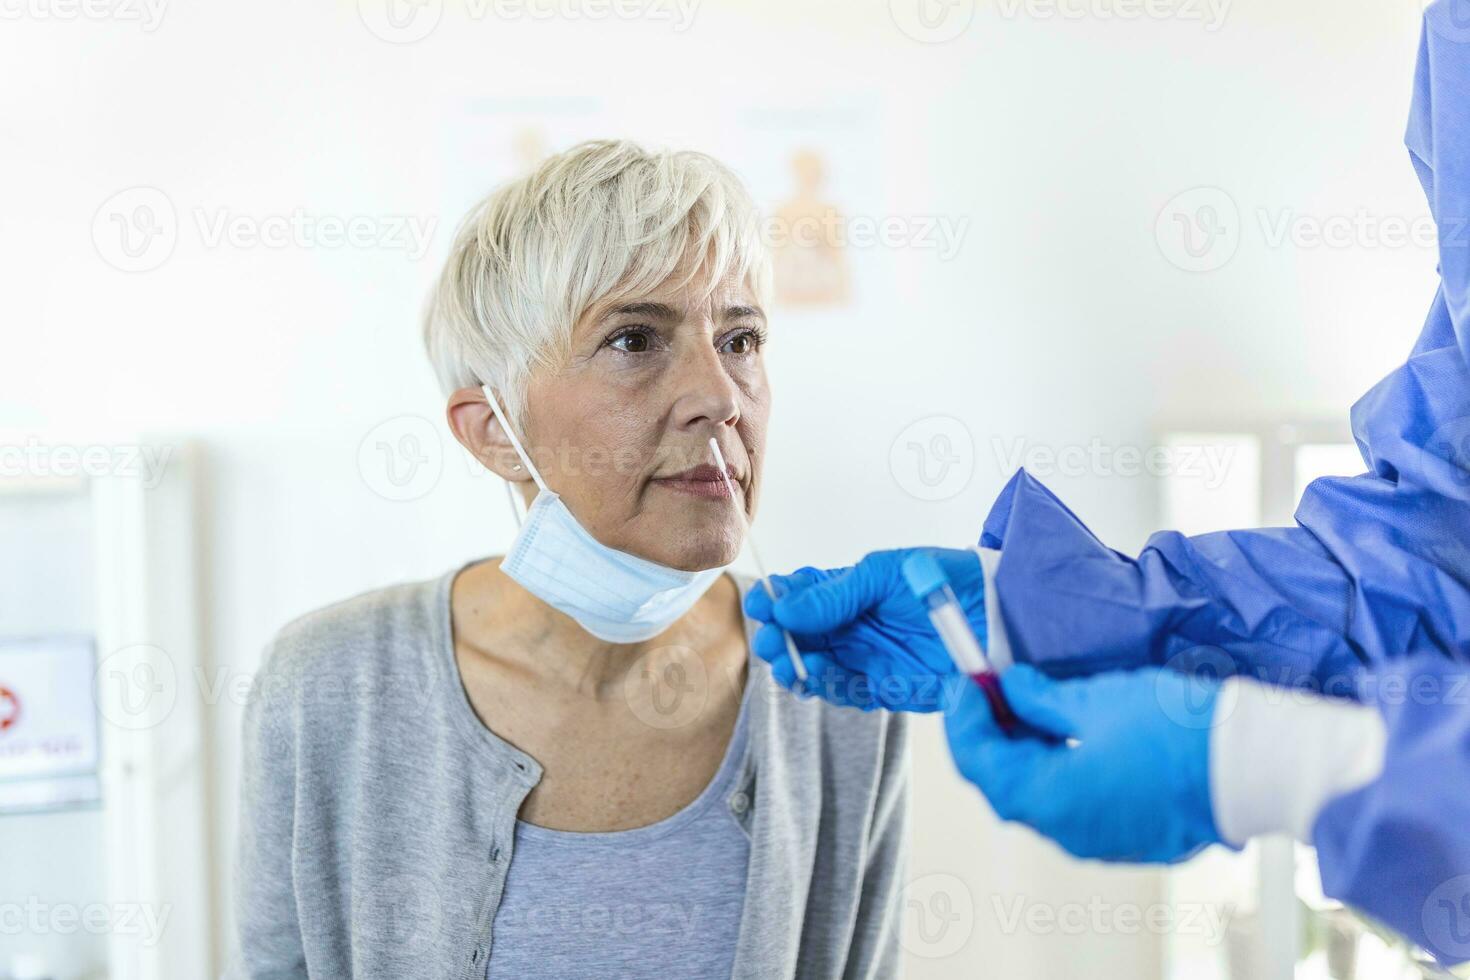 Physician wearing personal protective equipment performing a Coronavirus COVID-19 PCR test, patient nasal NP and oral OP swab sample specimen collection process, viral rt-PCR DNA diagnostic procedure photo